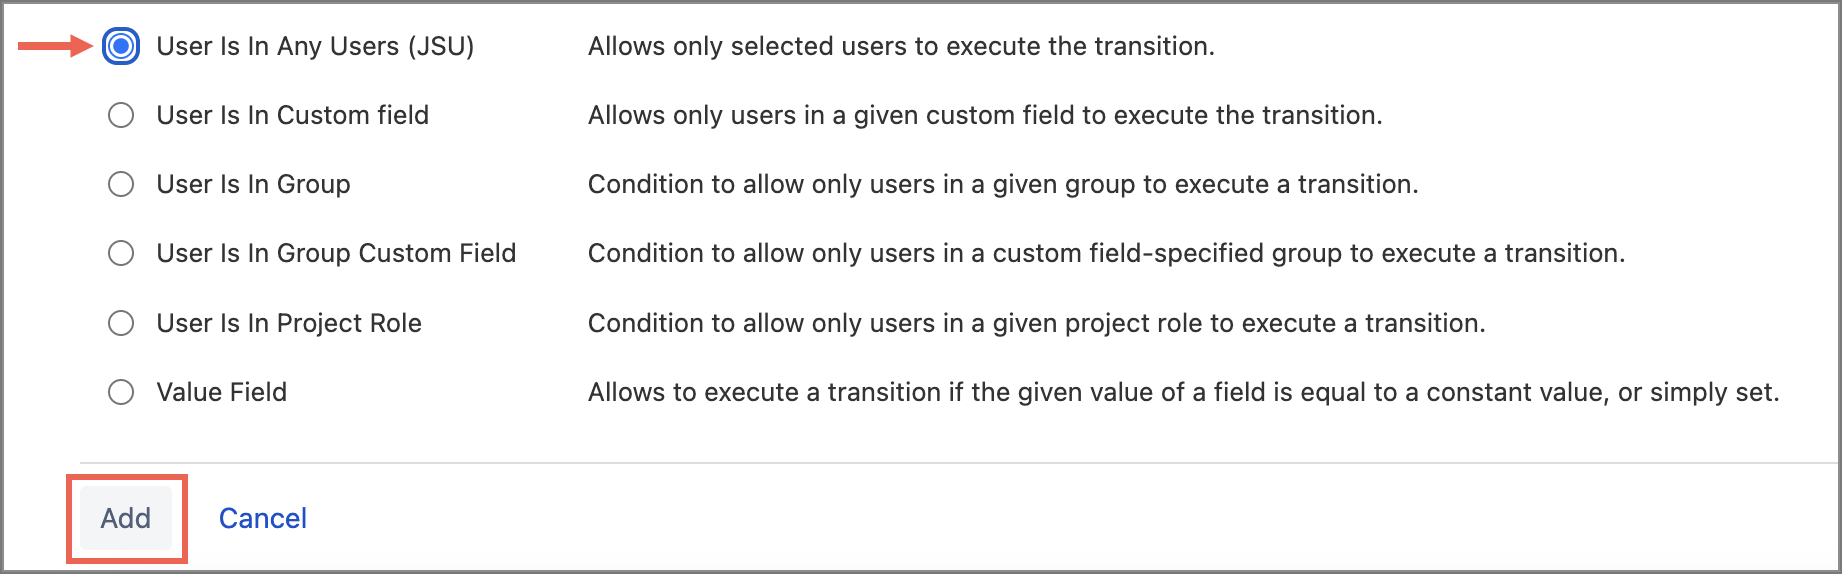 List of available conditions showing the selected Users Is In Any Users condition.